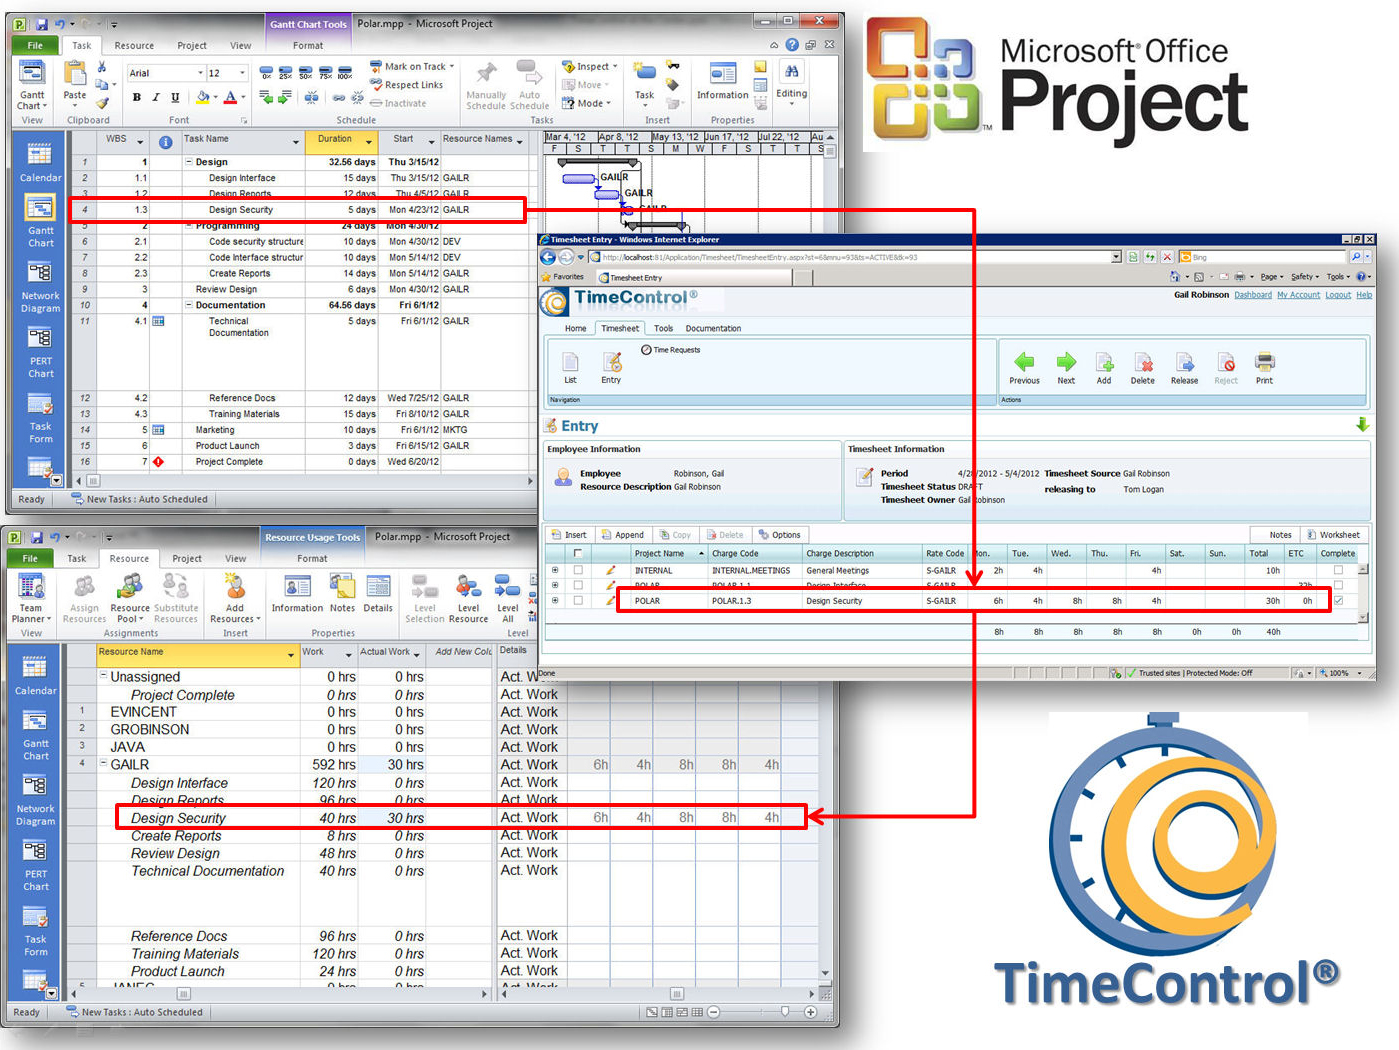 Microsoft Project and TimeControl